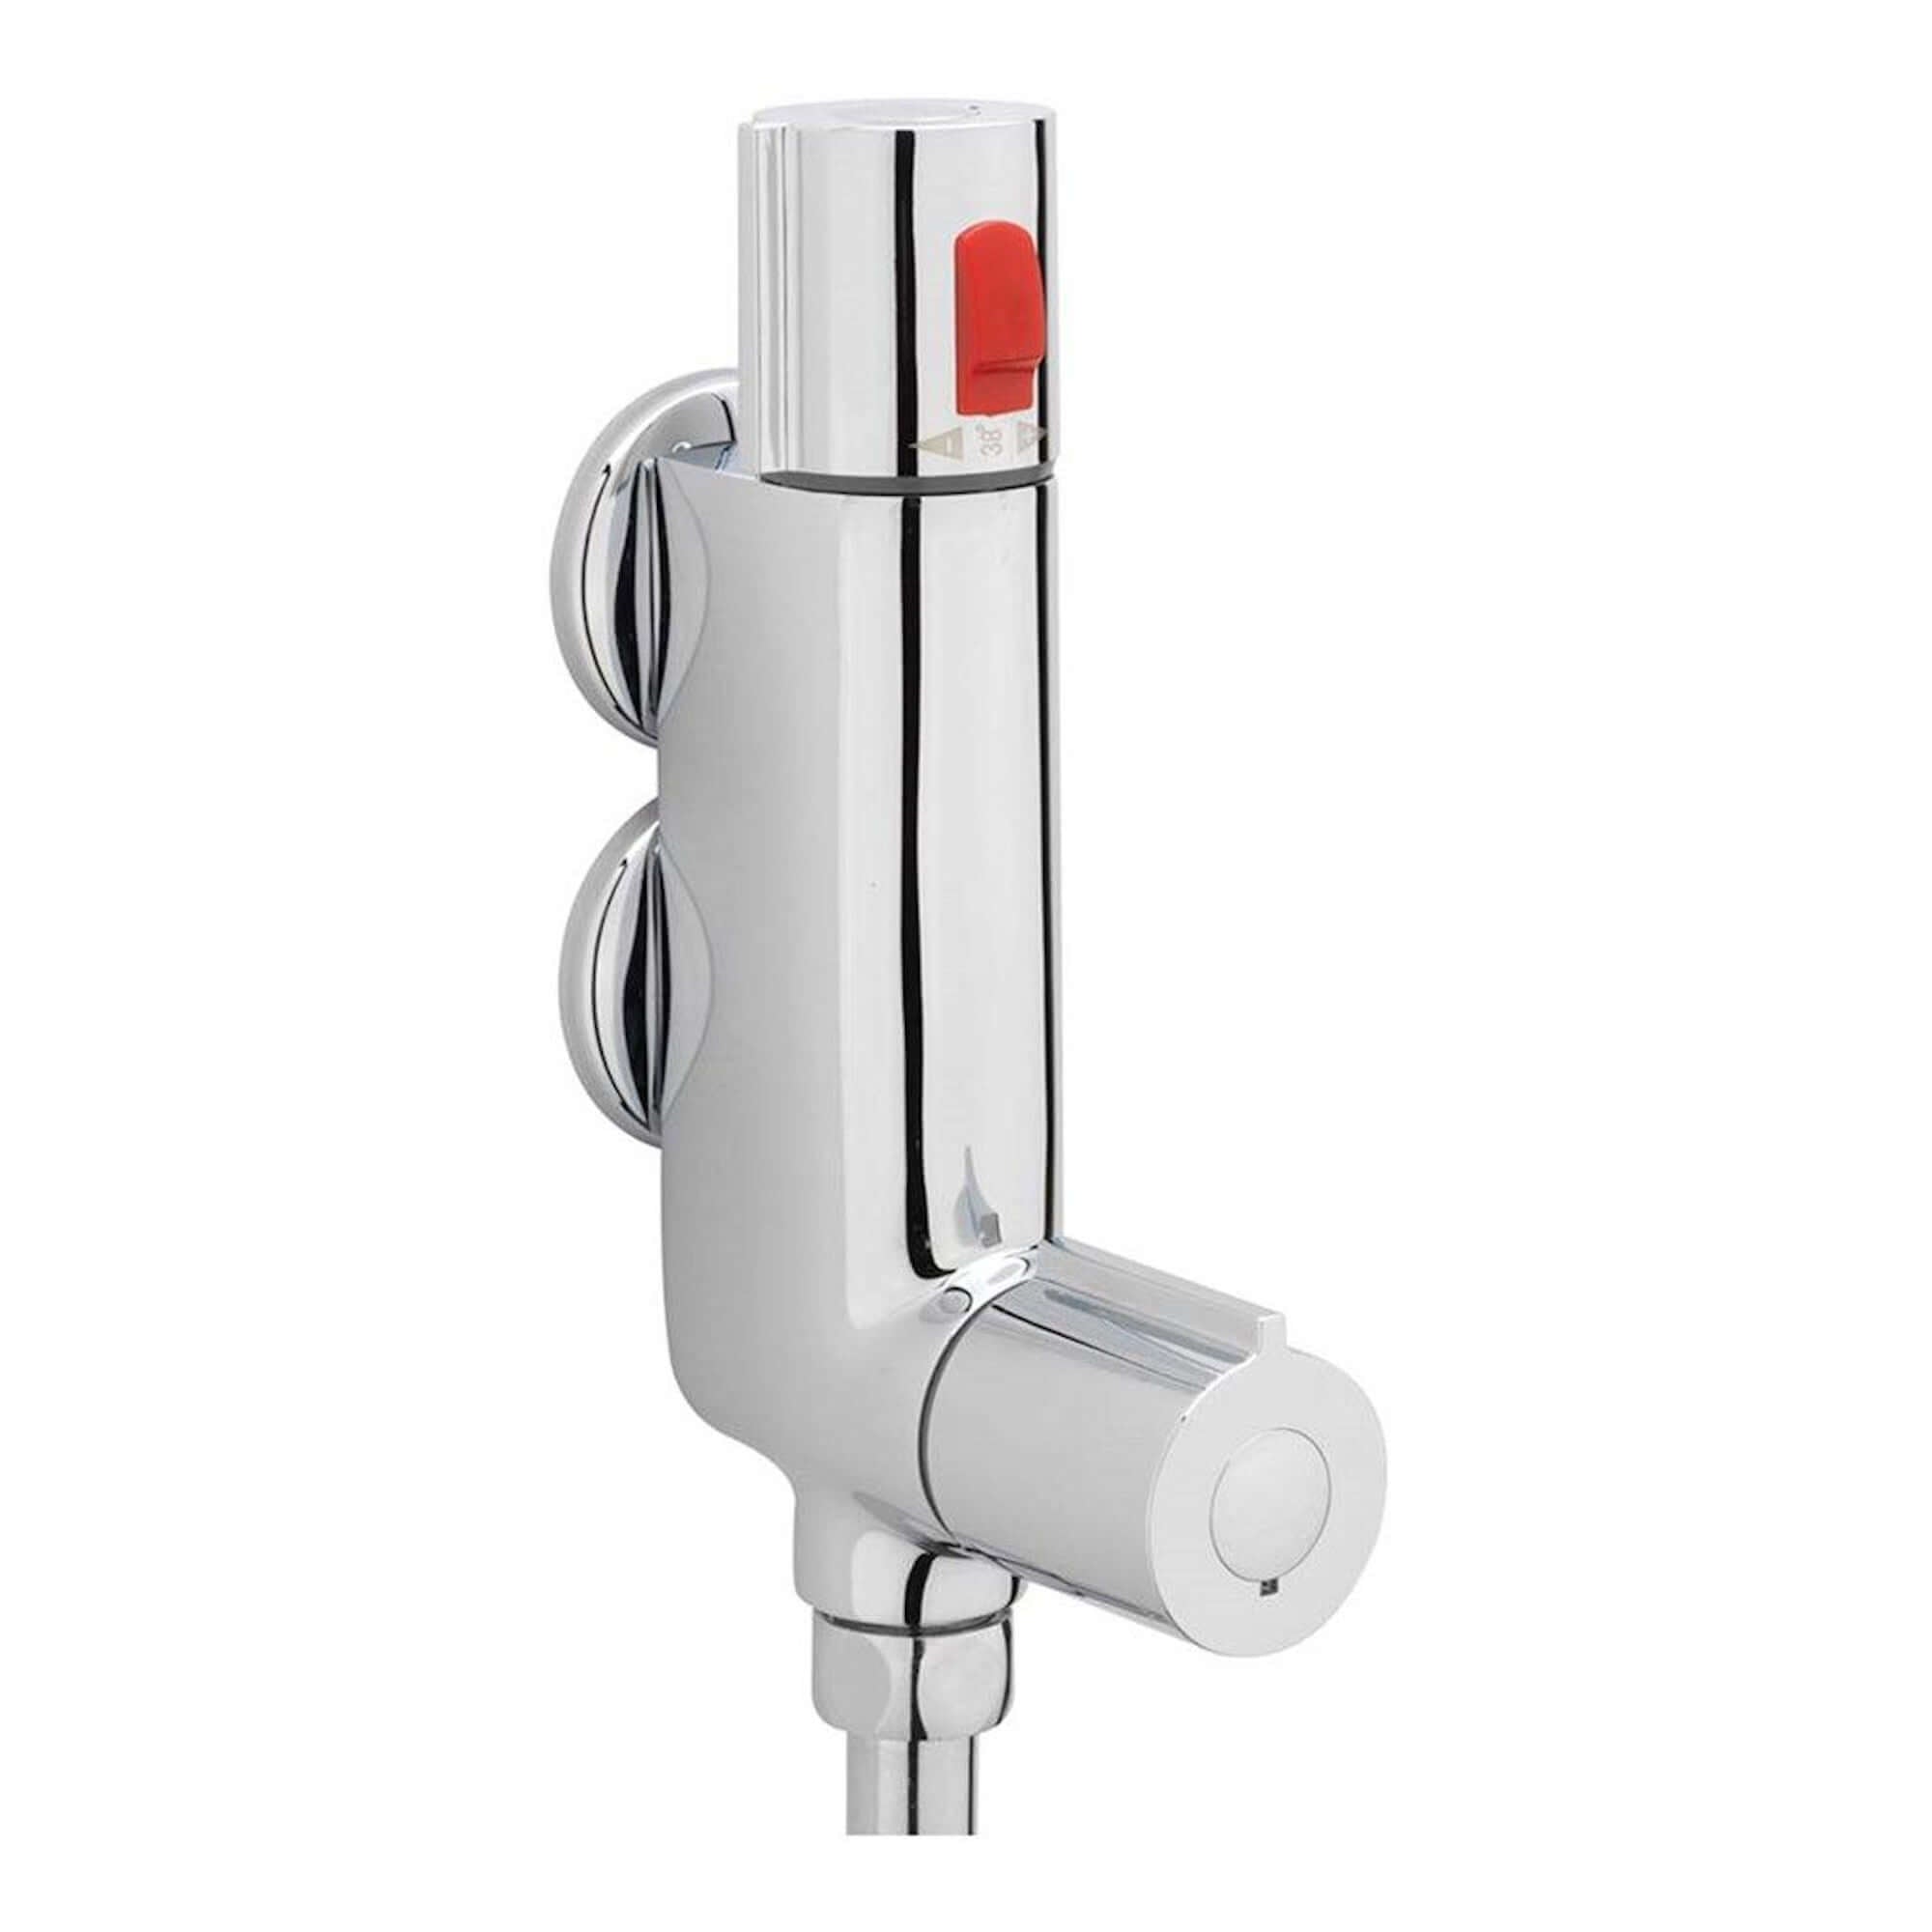 T26-01-haven-vertical-thermostatic-bar-shower-mixer-valve-with-45mm-fixing-centres-chrome